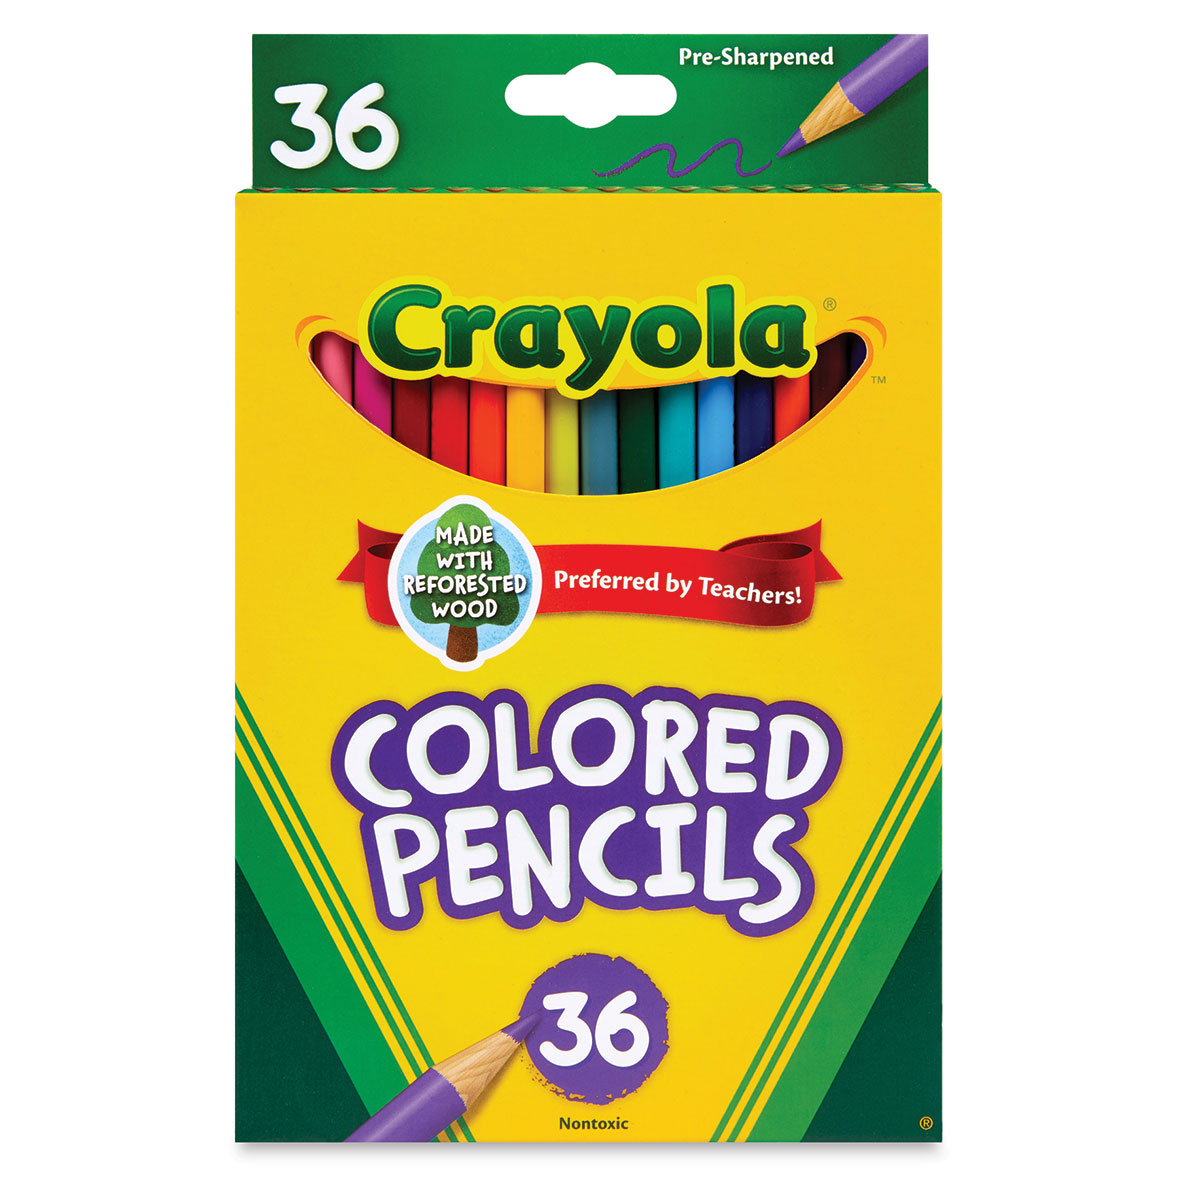 Crayola Write Start Colored Pencils box of 8 [PACK OF 6 ]